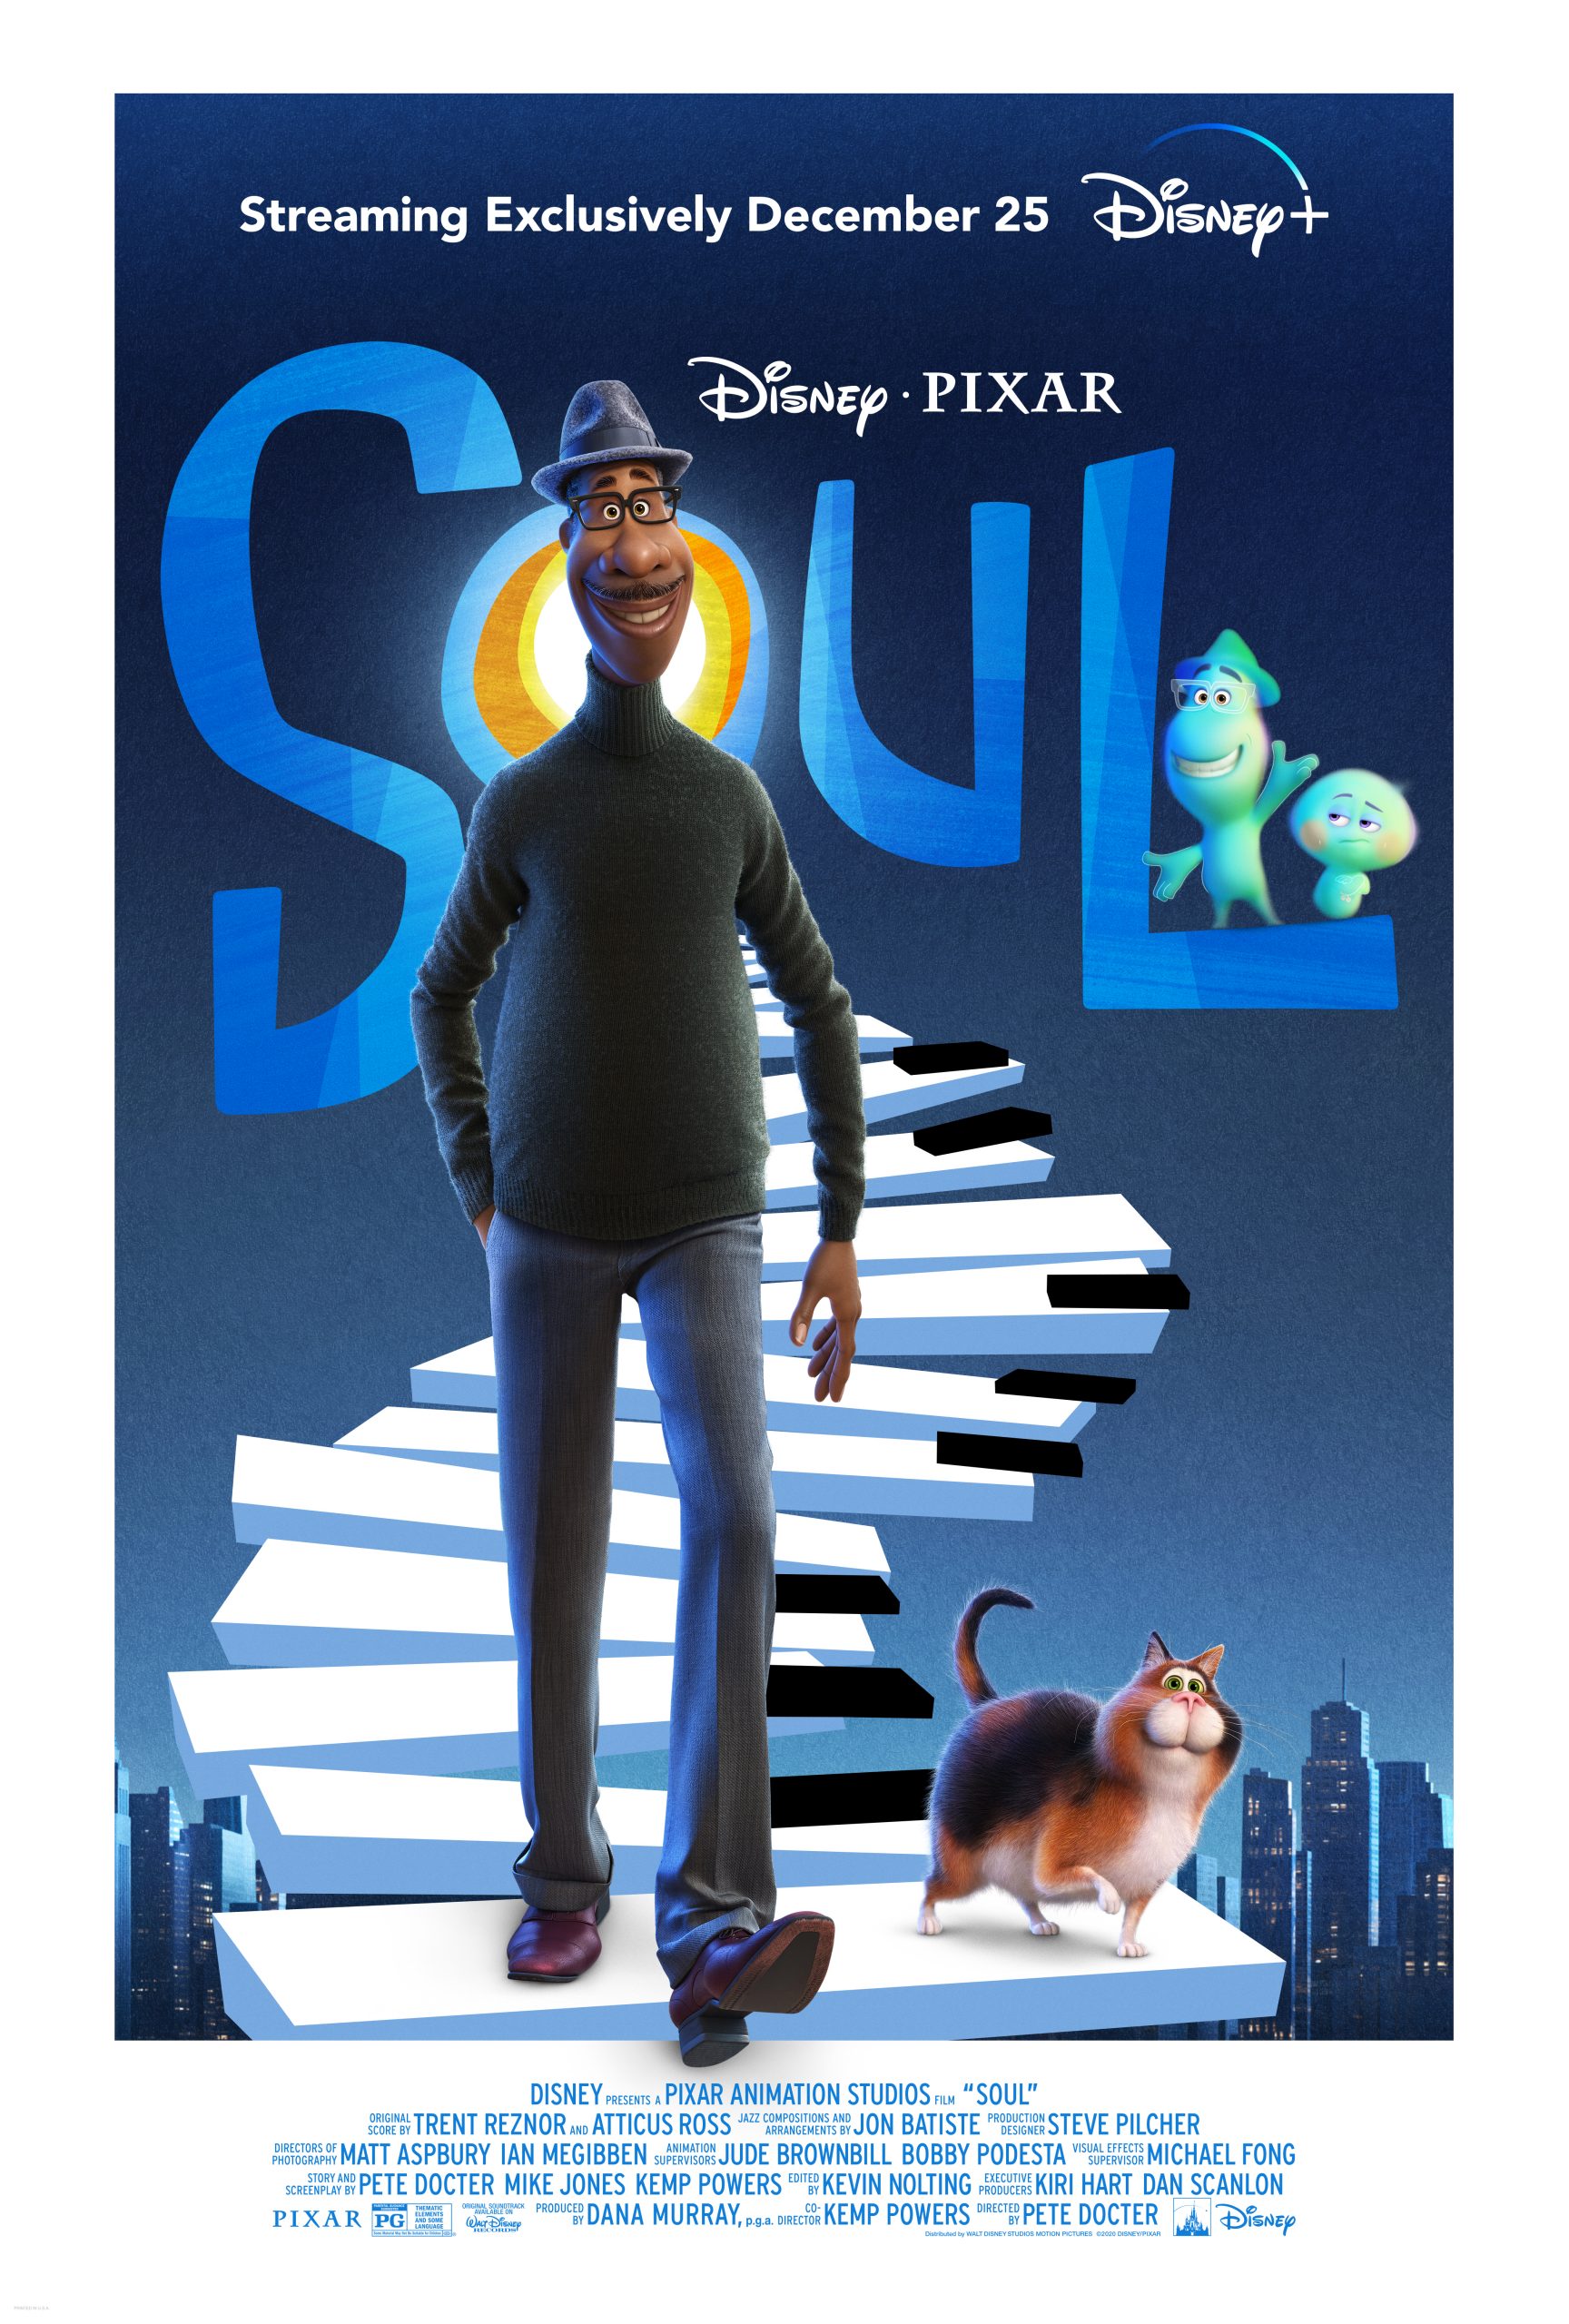 My Review Plus Most Memorable Quotes From Disney Pixar’s ‘Soul’